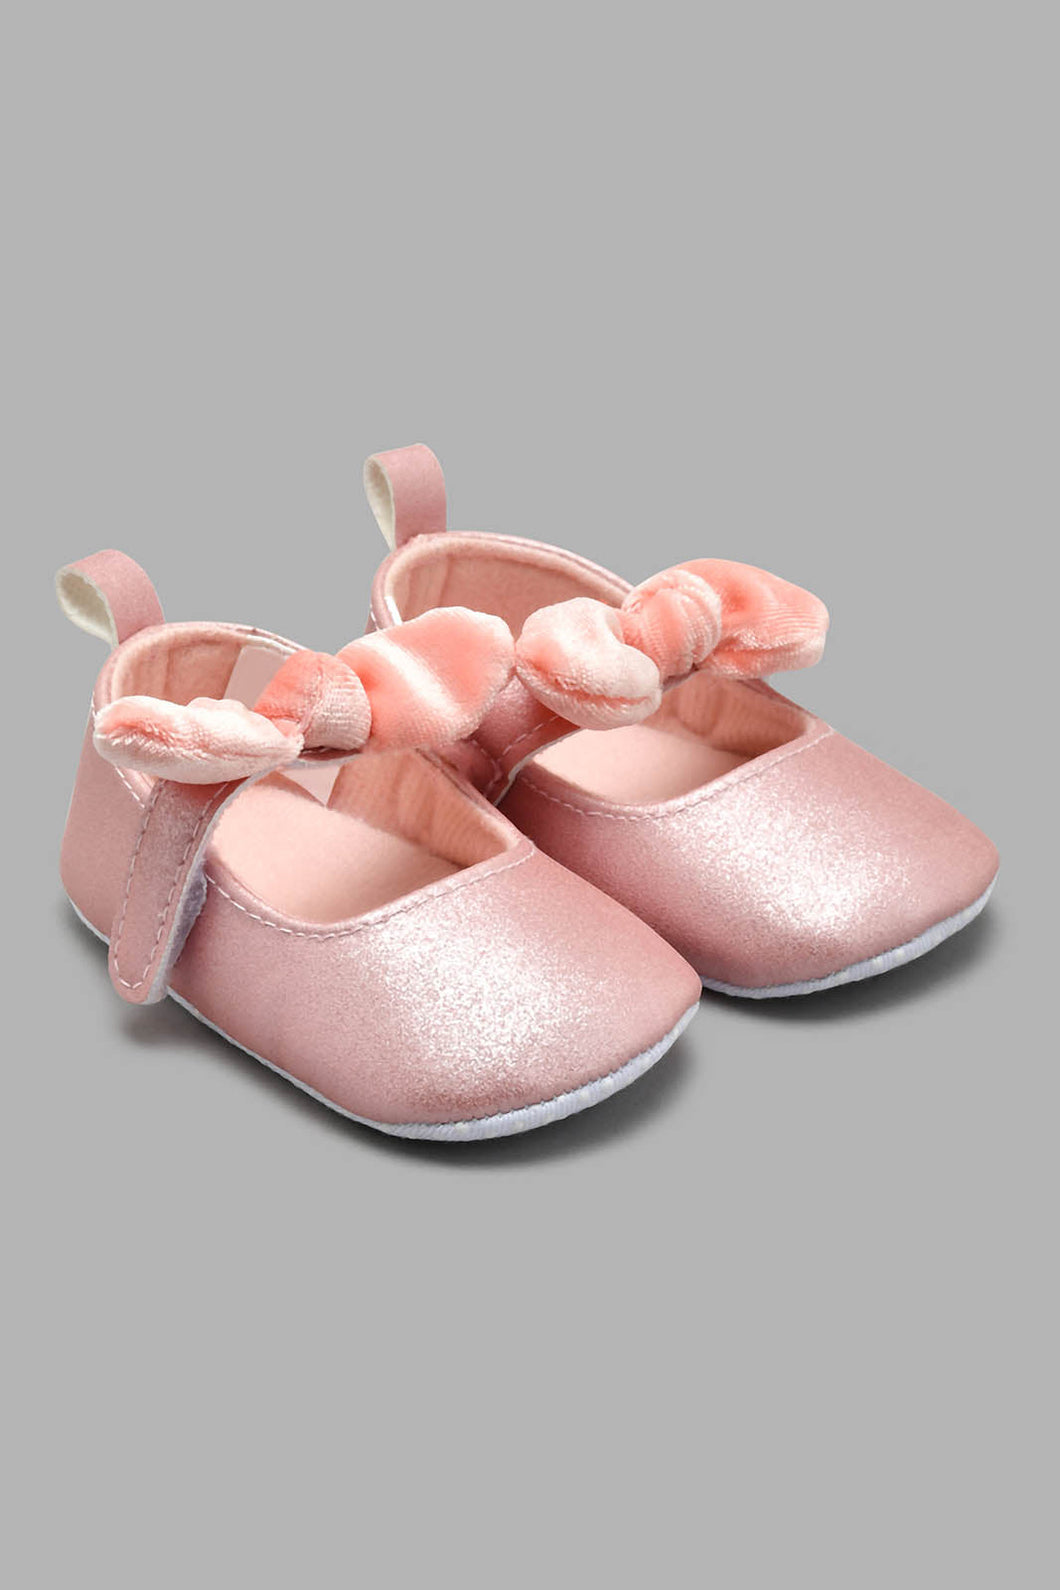 Pink Velcro Pram Shoe With a Bow